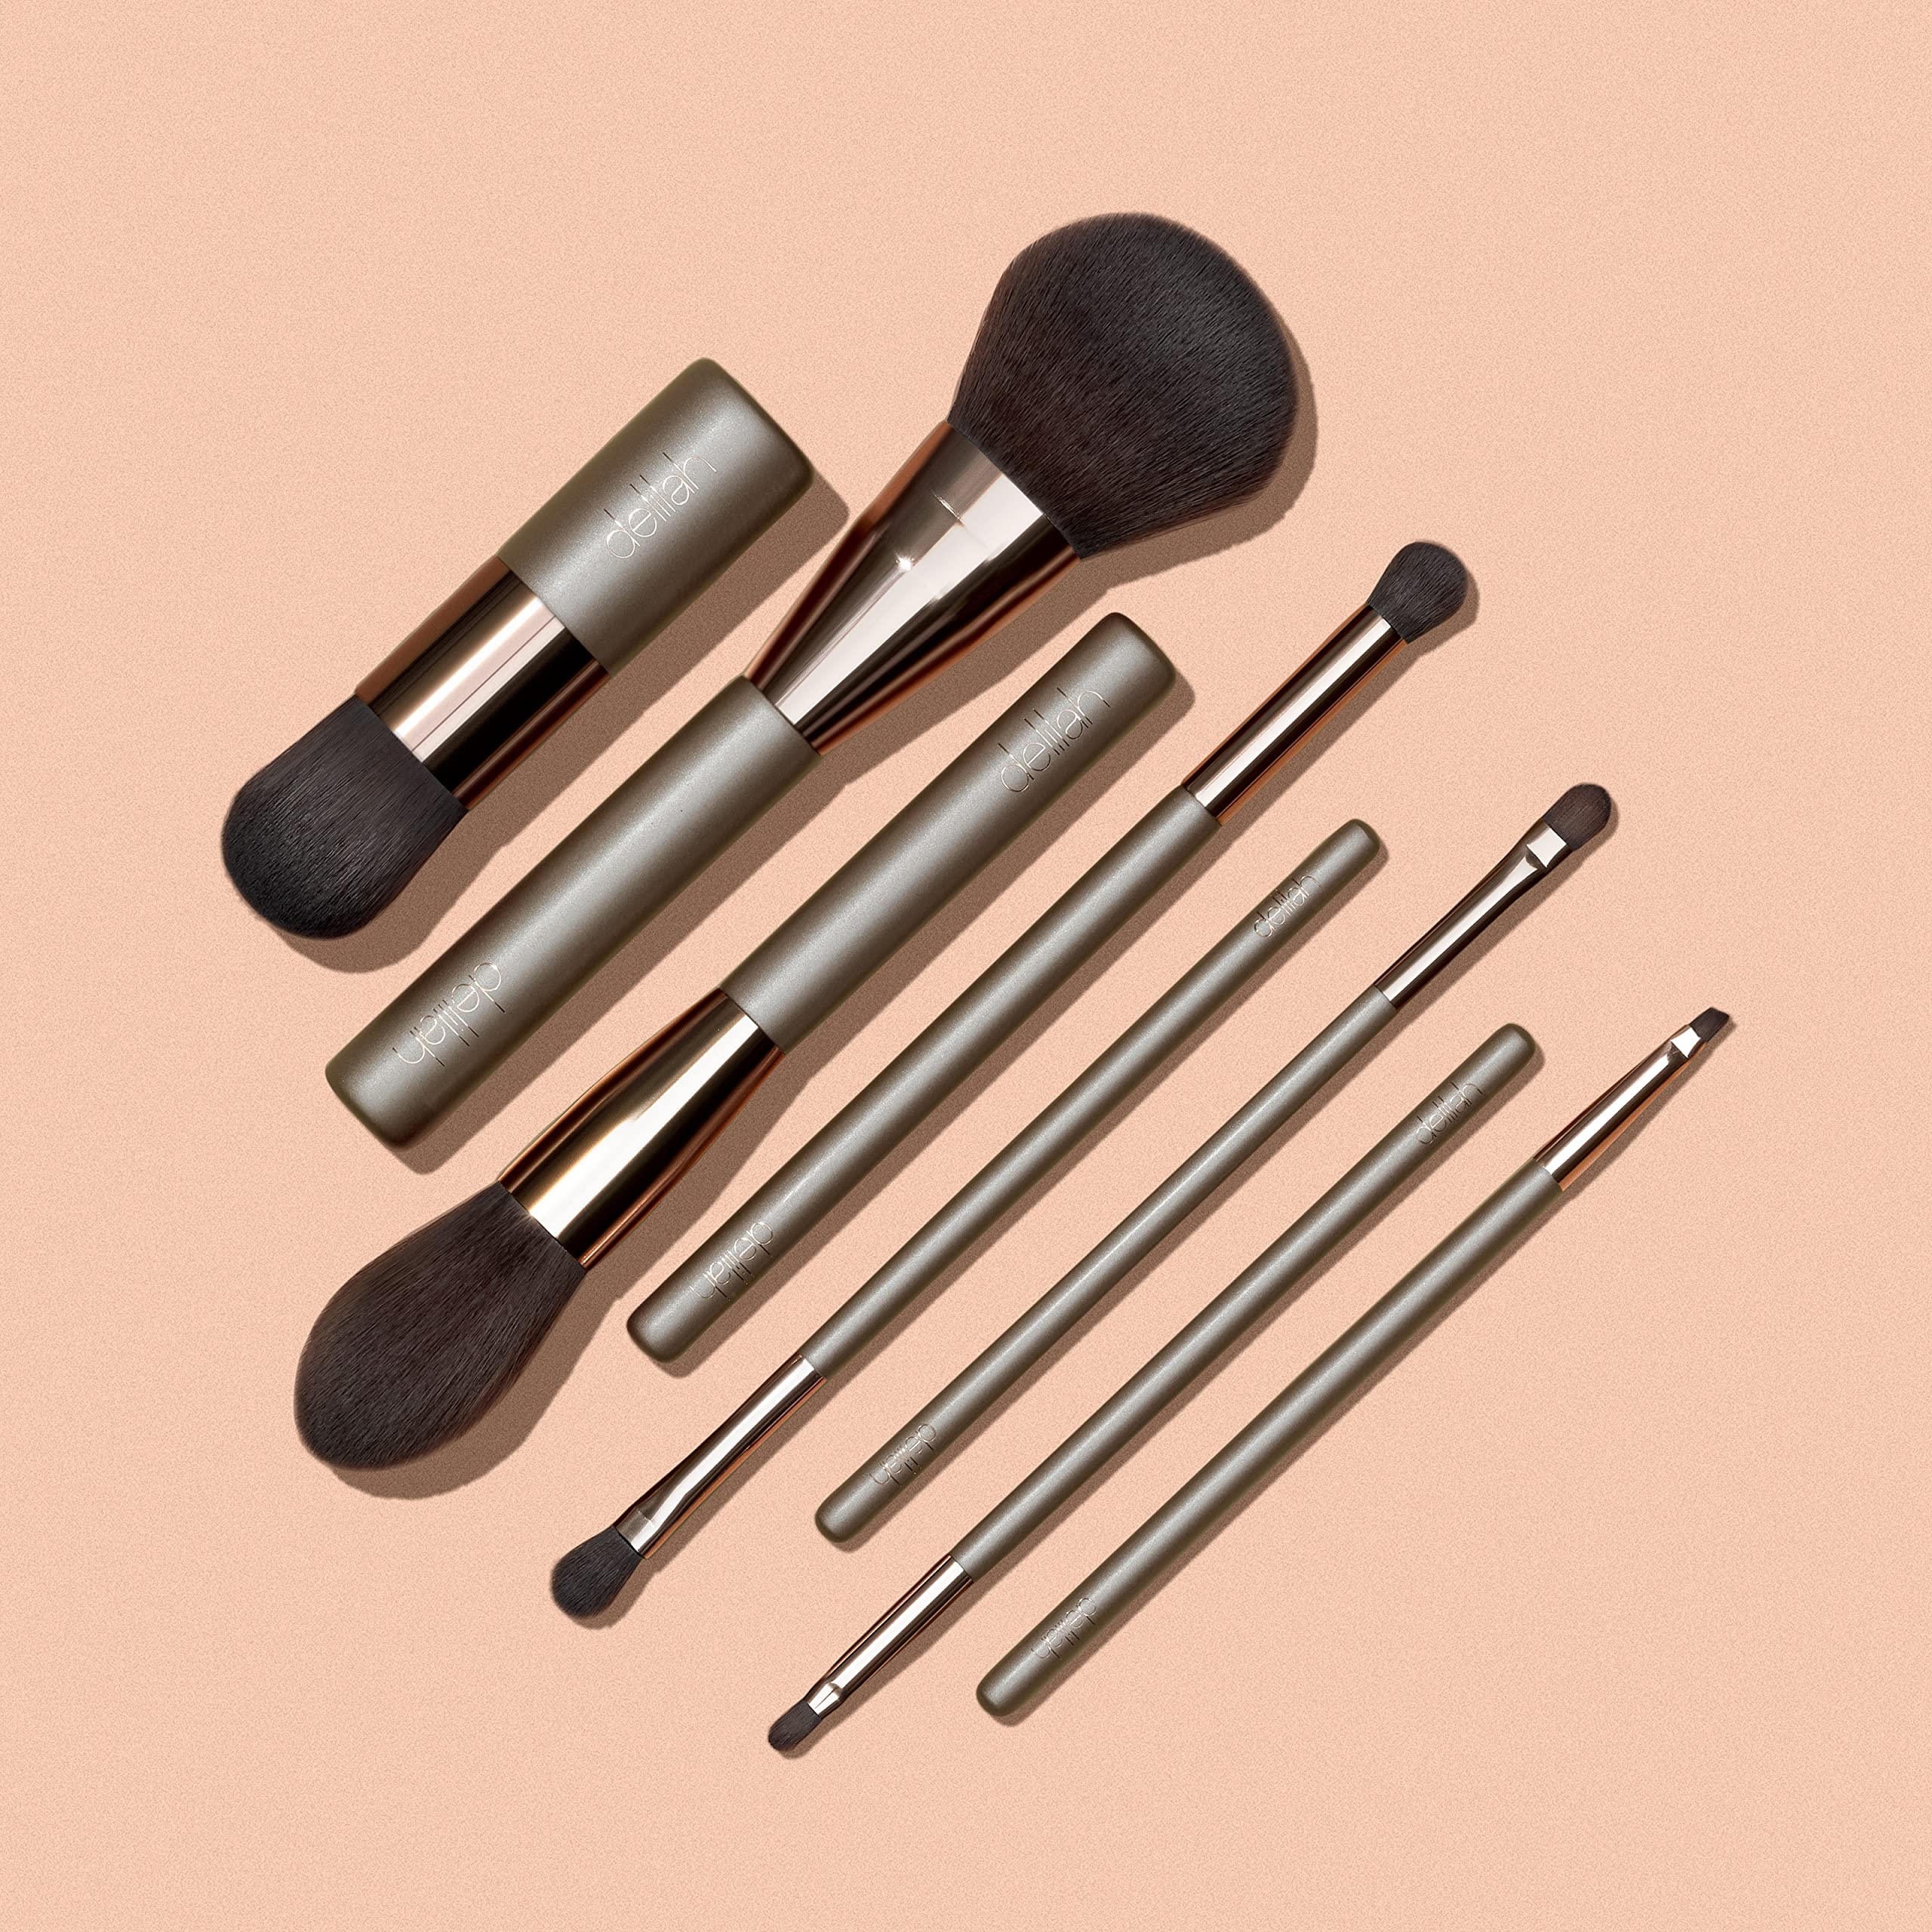 delilah - Foundation Kabuki Complexion Brush - Synthetic Fibre Liquid Blending And Buffing Makeup Tool - Wooden HAndle - For all Skin Type - Cruelty Free - 1 Pc